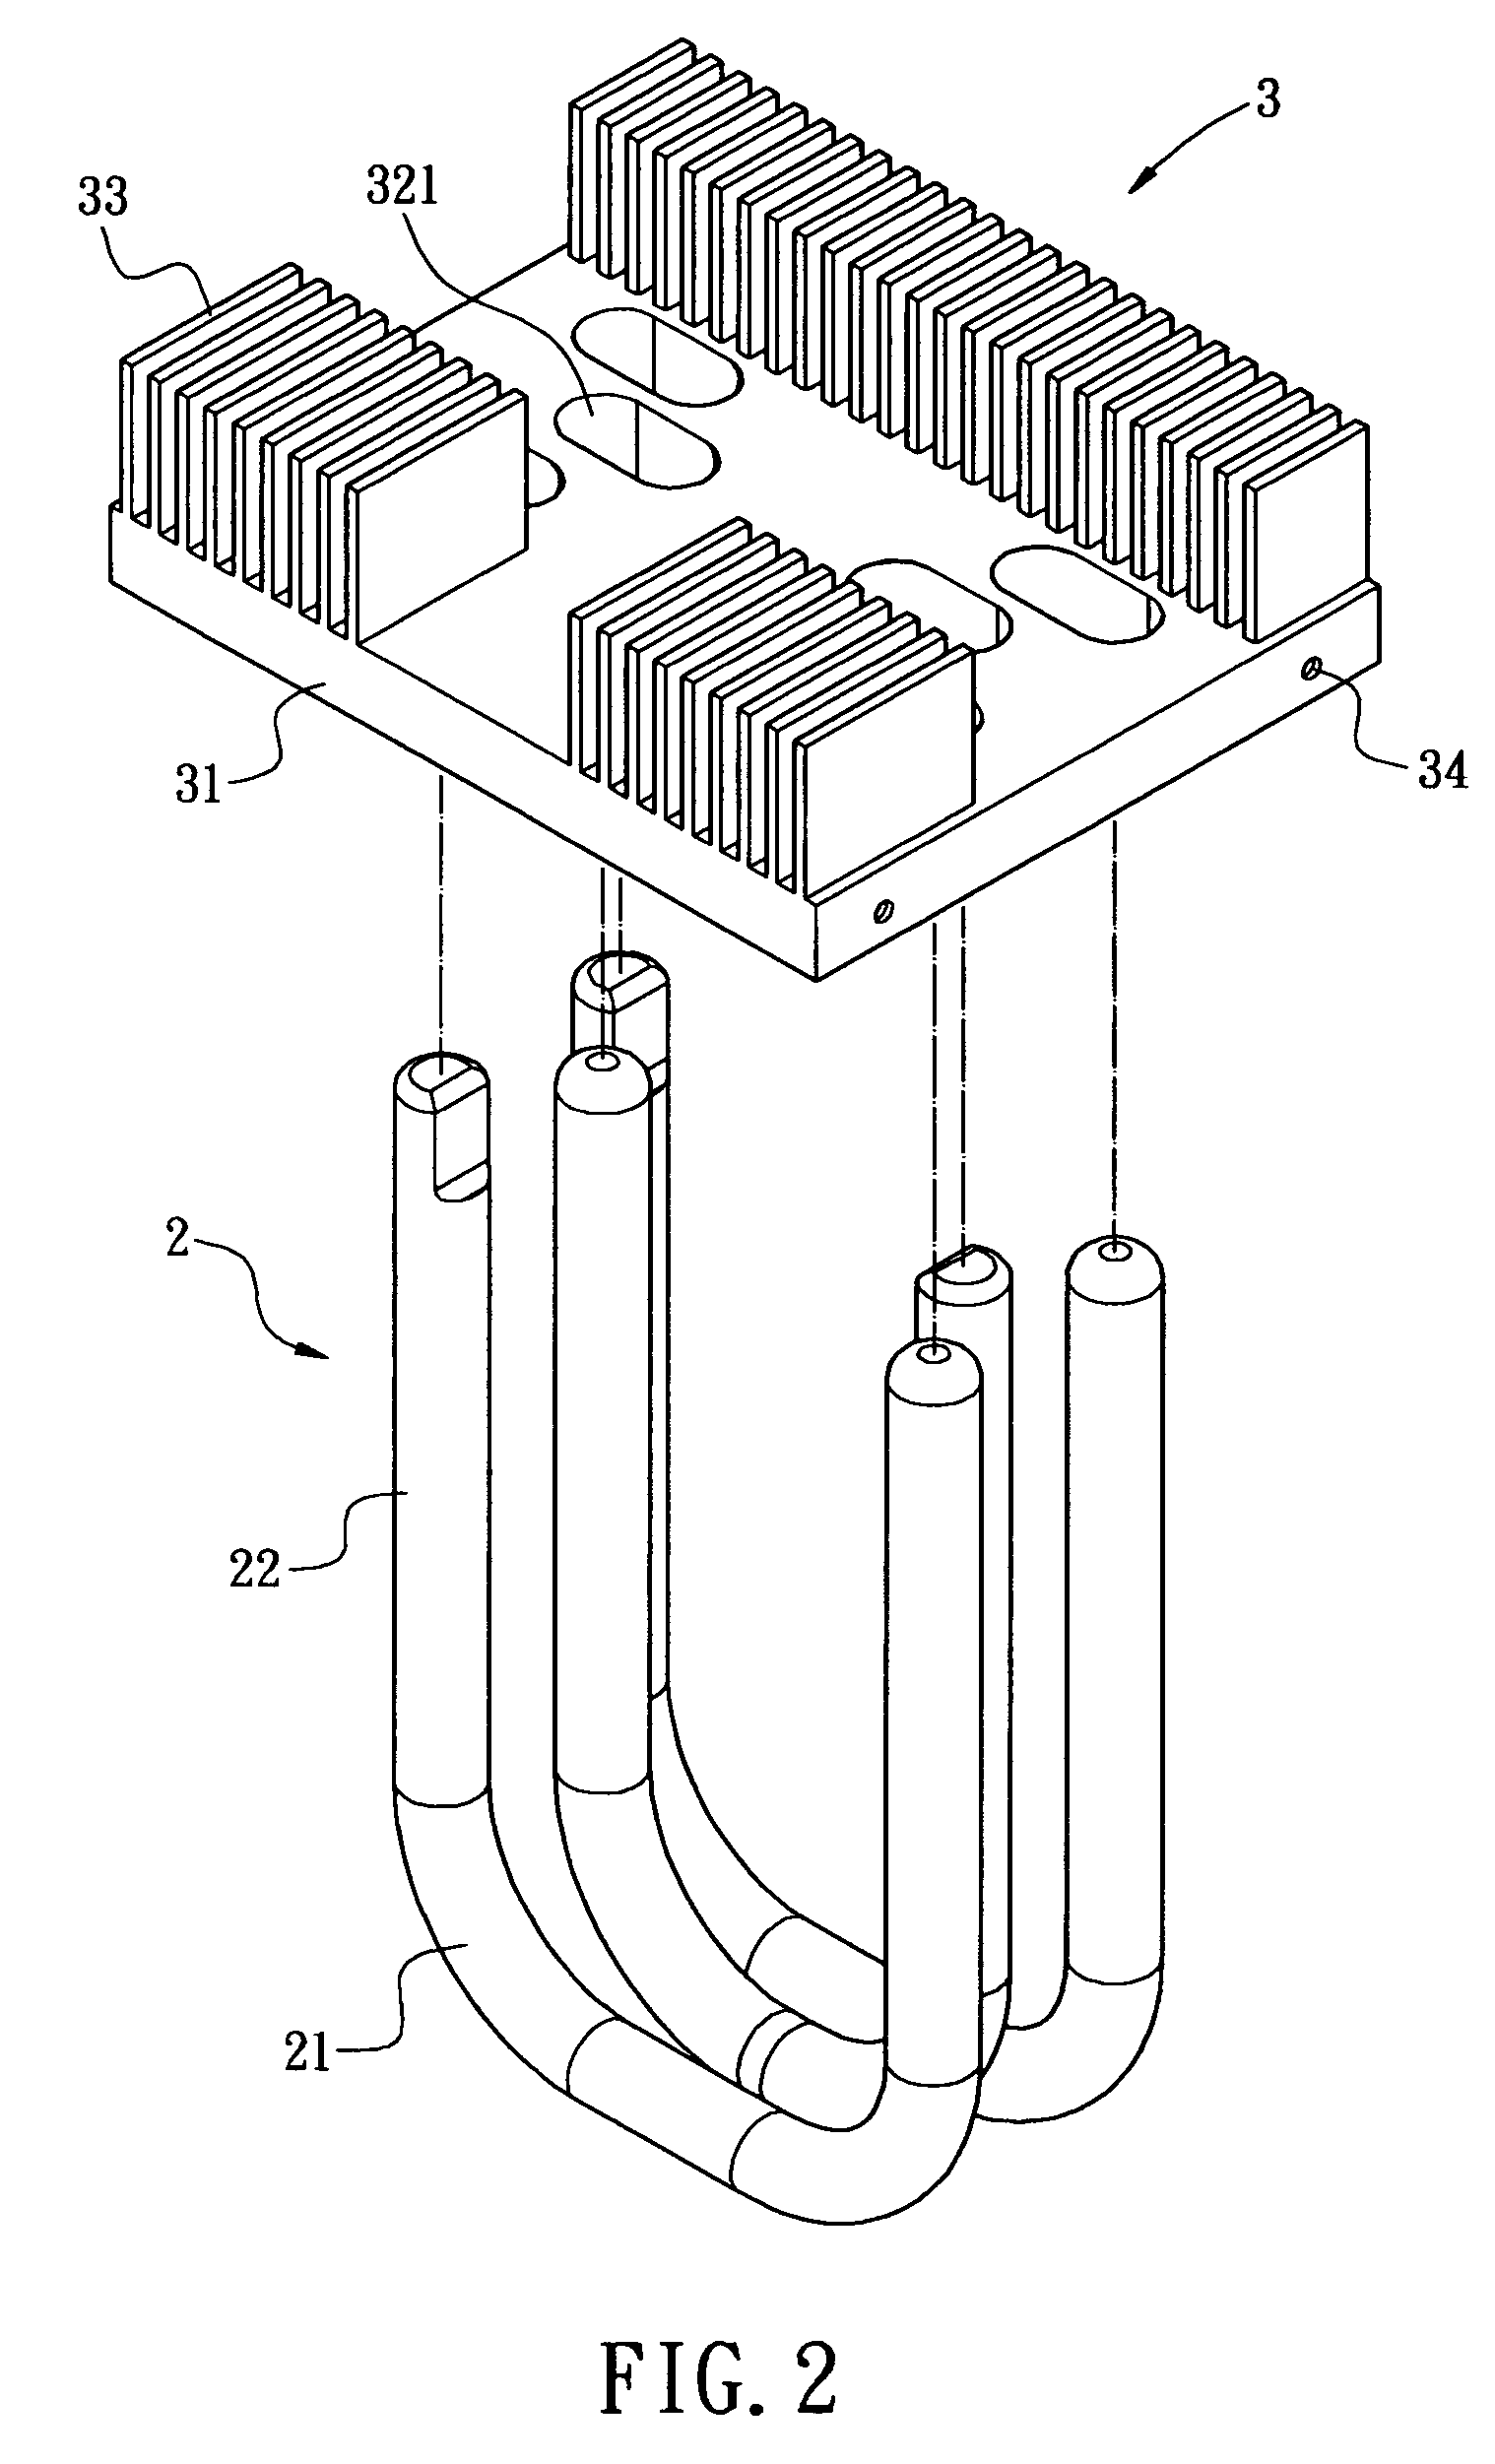 Thermal structure for electric devices